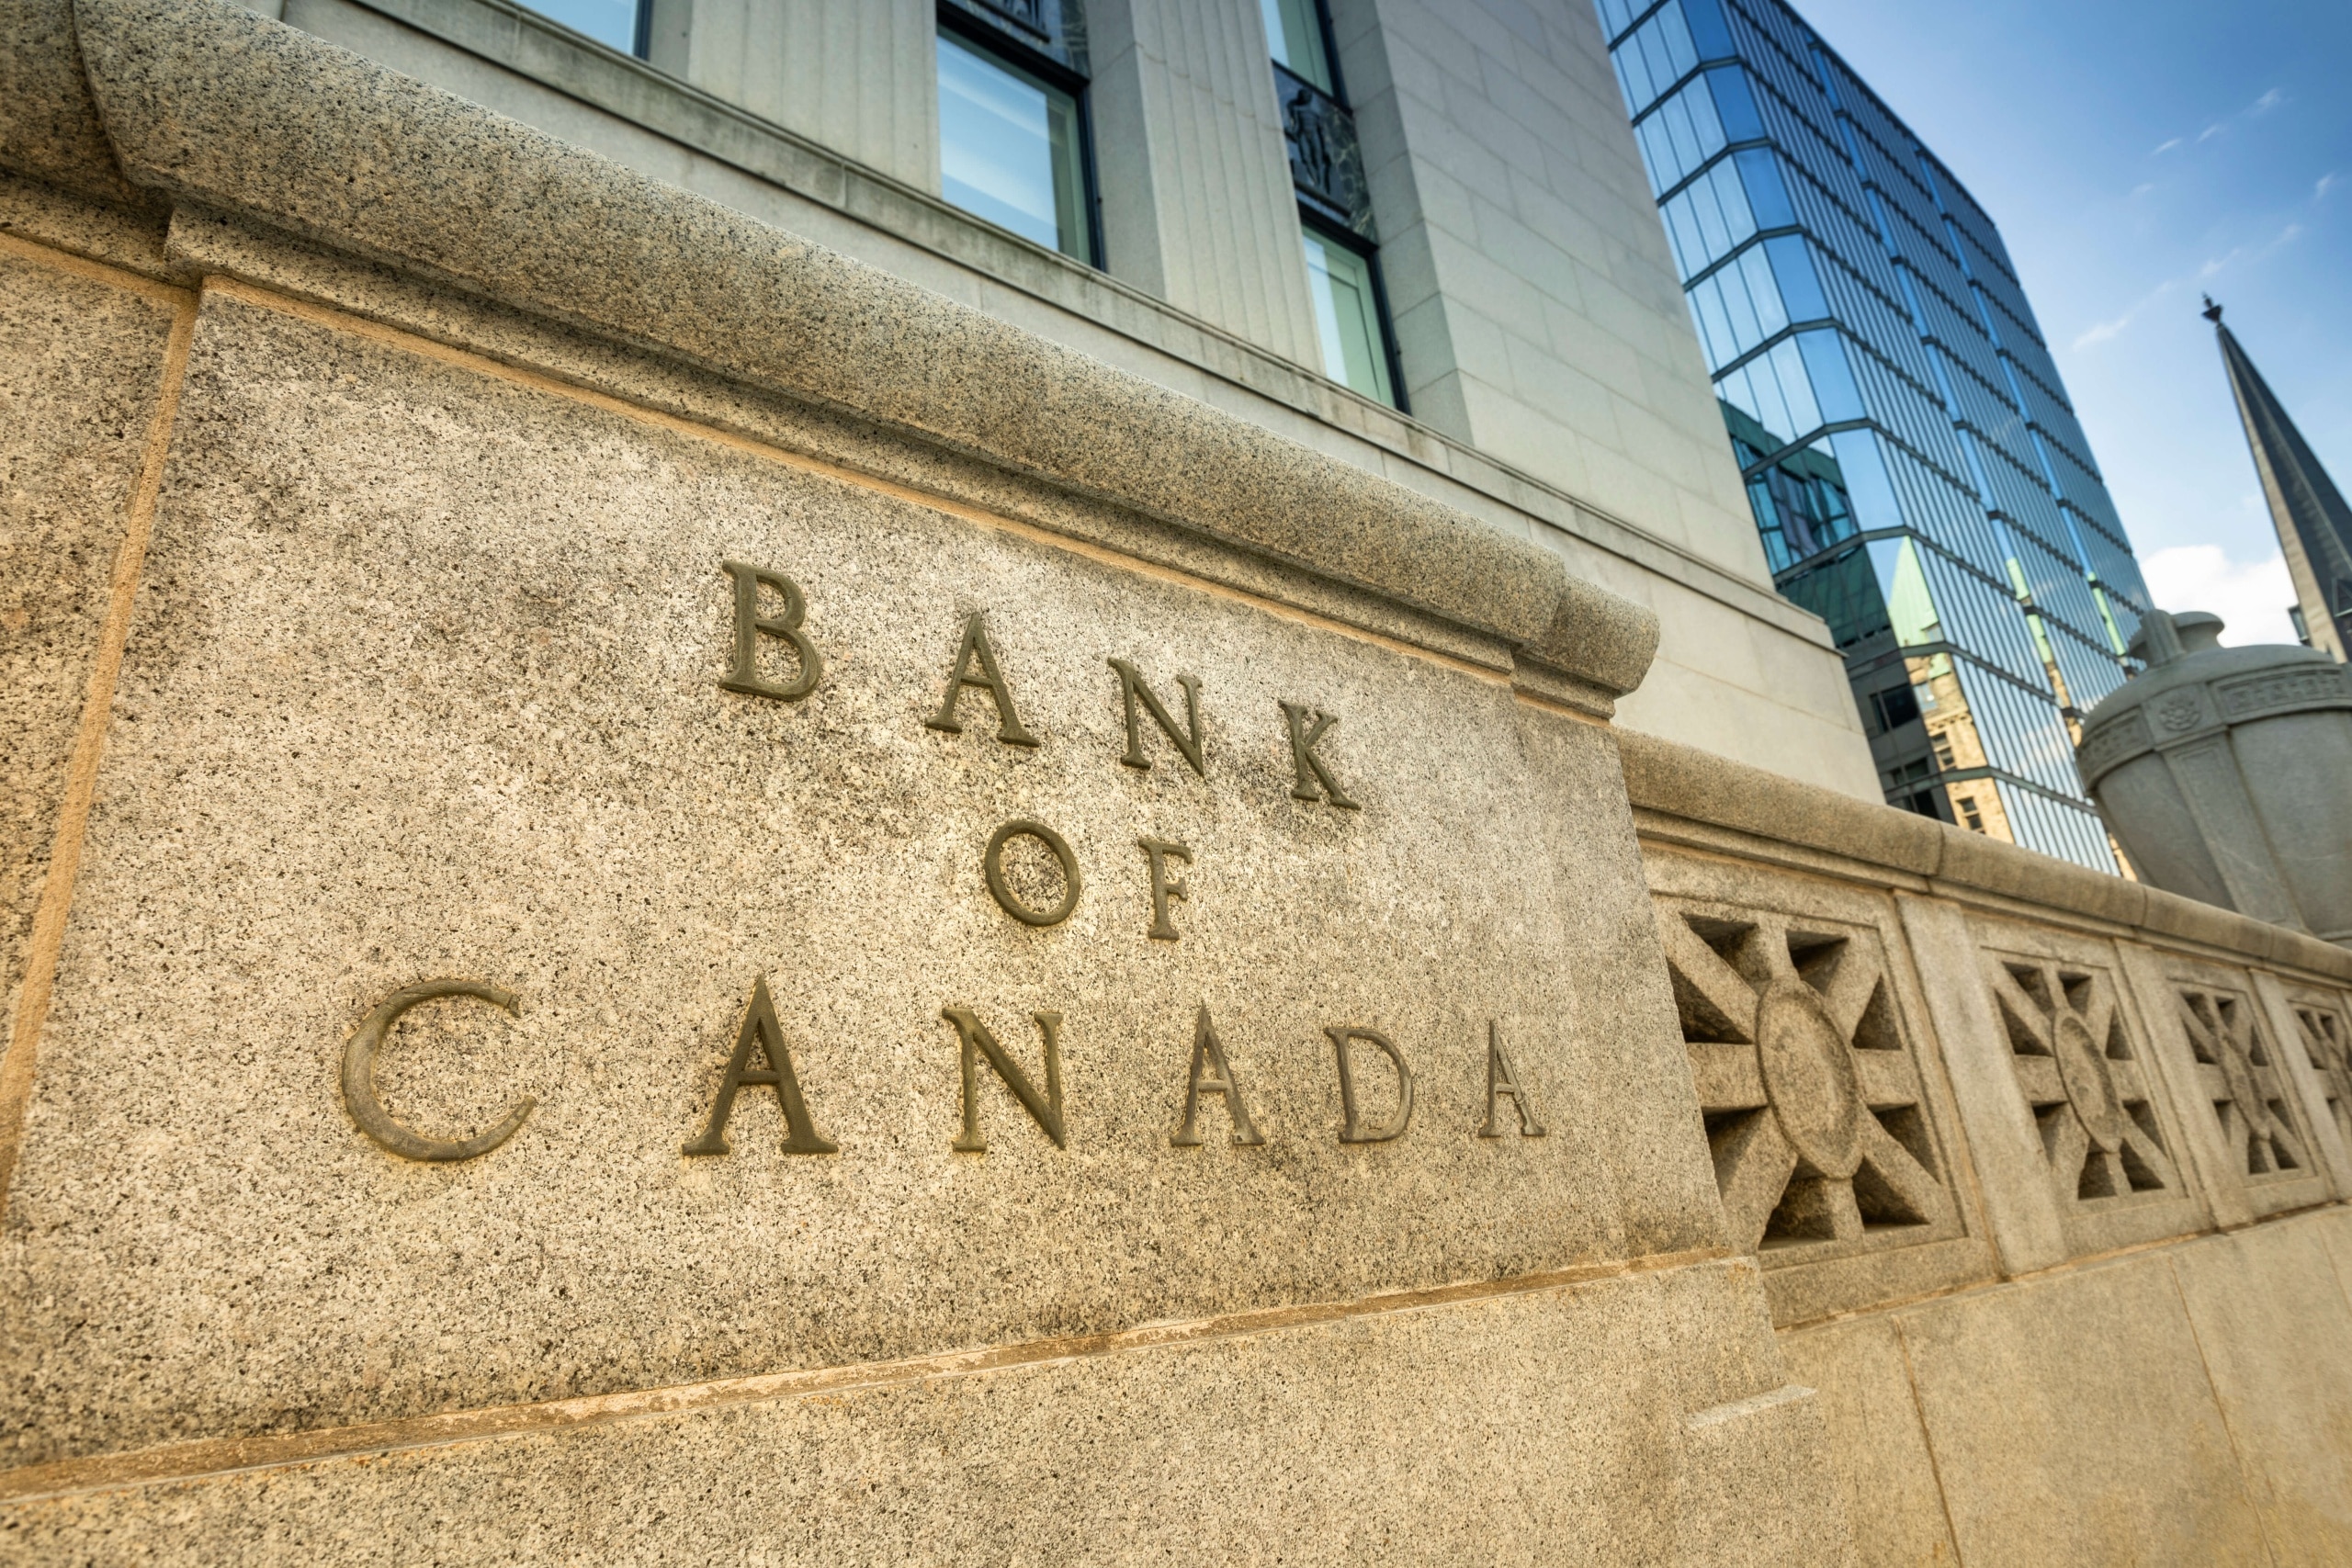 CAD - Chances to rate hikes by the Bank of Canada